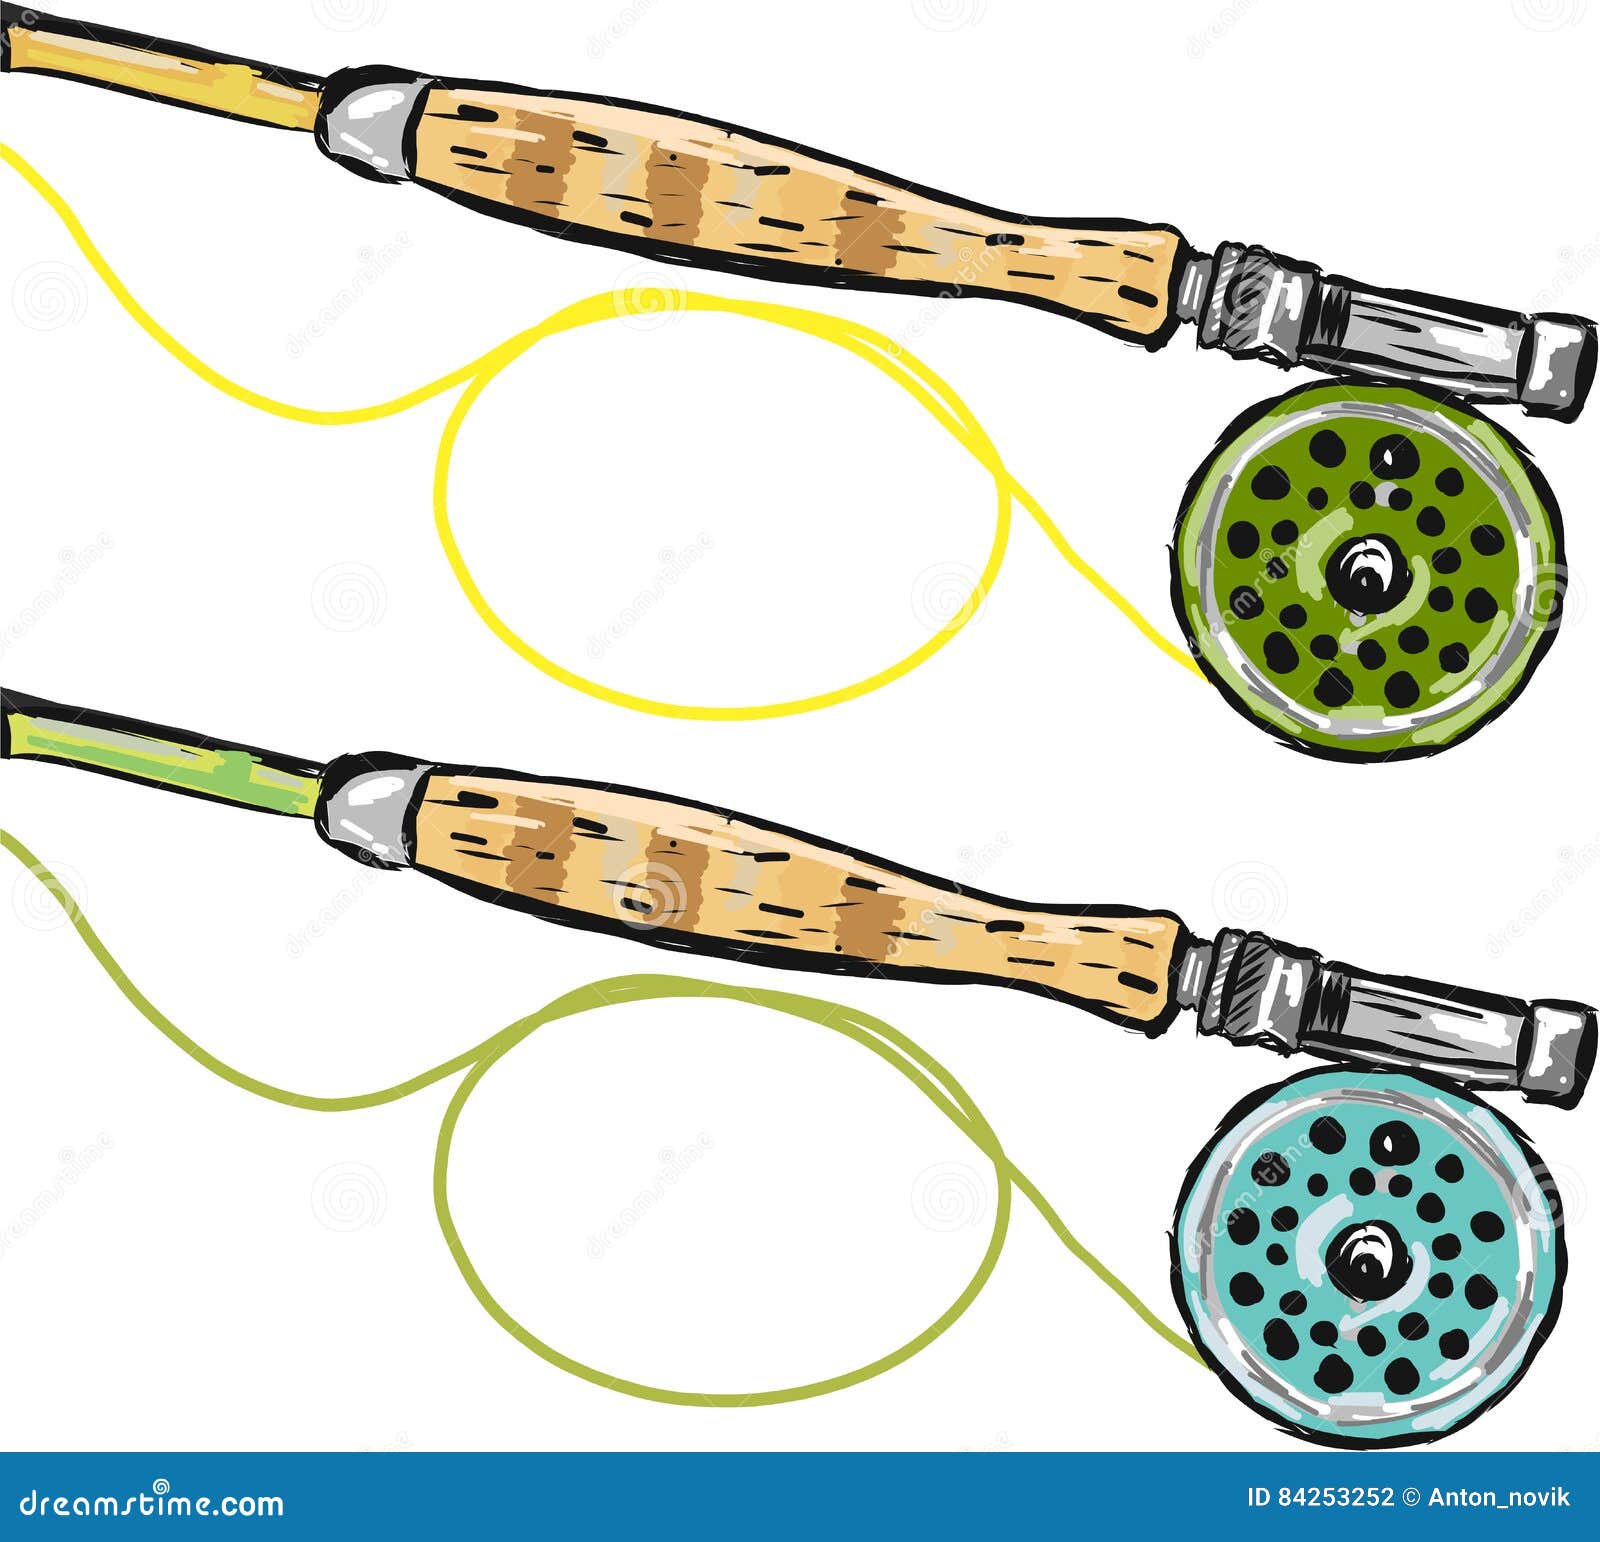 Fly Fishing Rods Vector Sketch Illustration Clip-art Image Stock Vector -  Illustration of drawing, element: 84253252